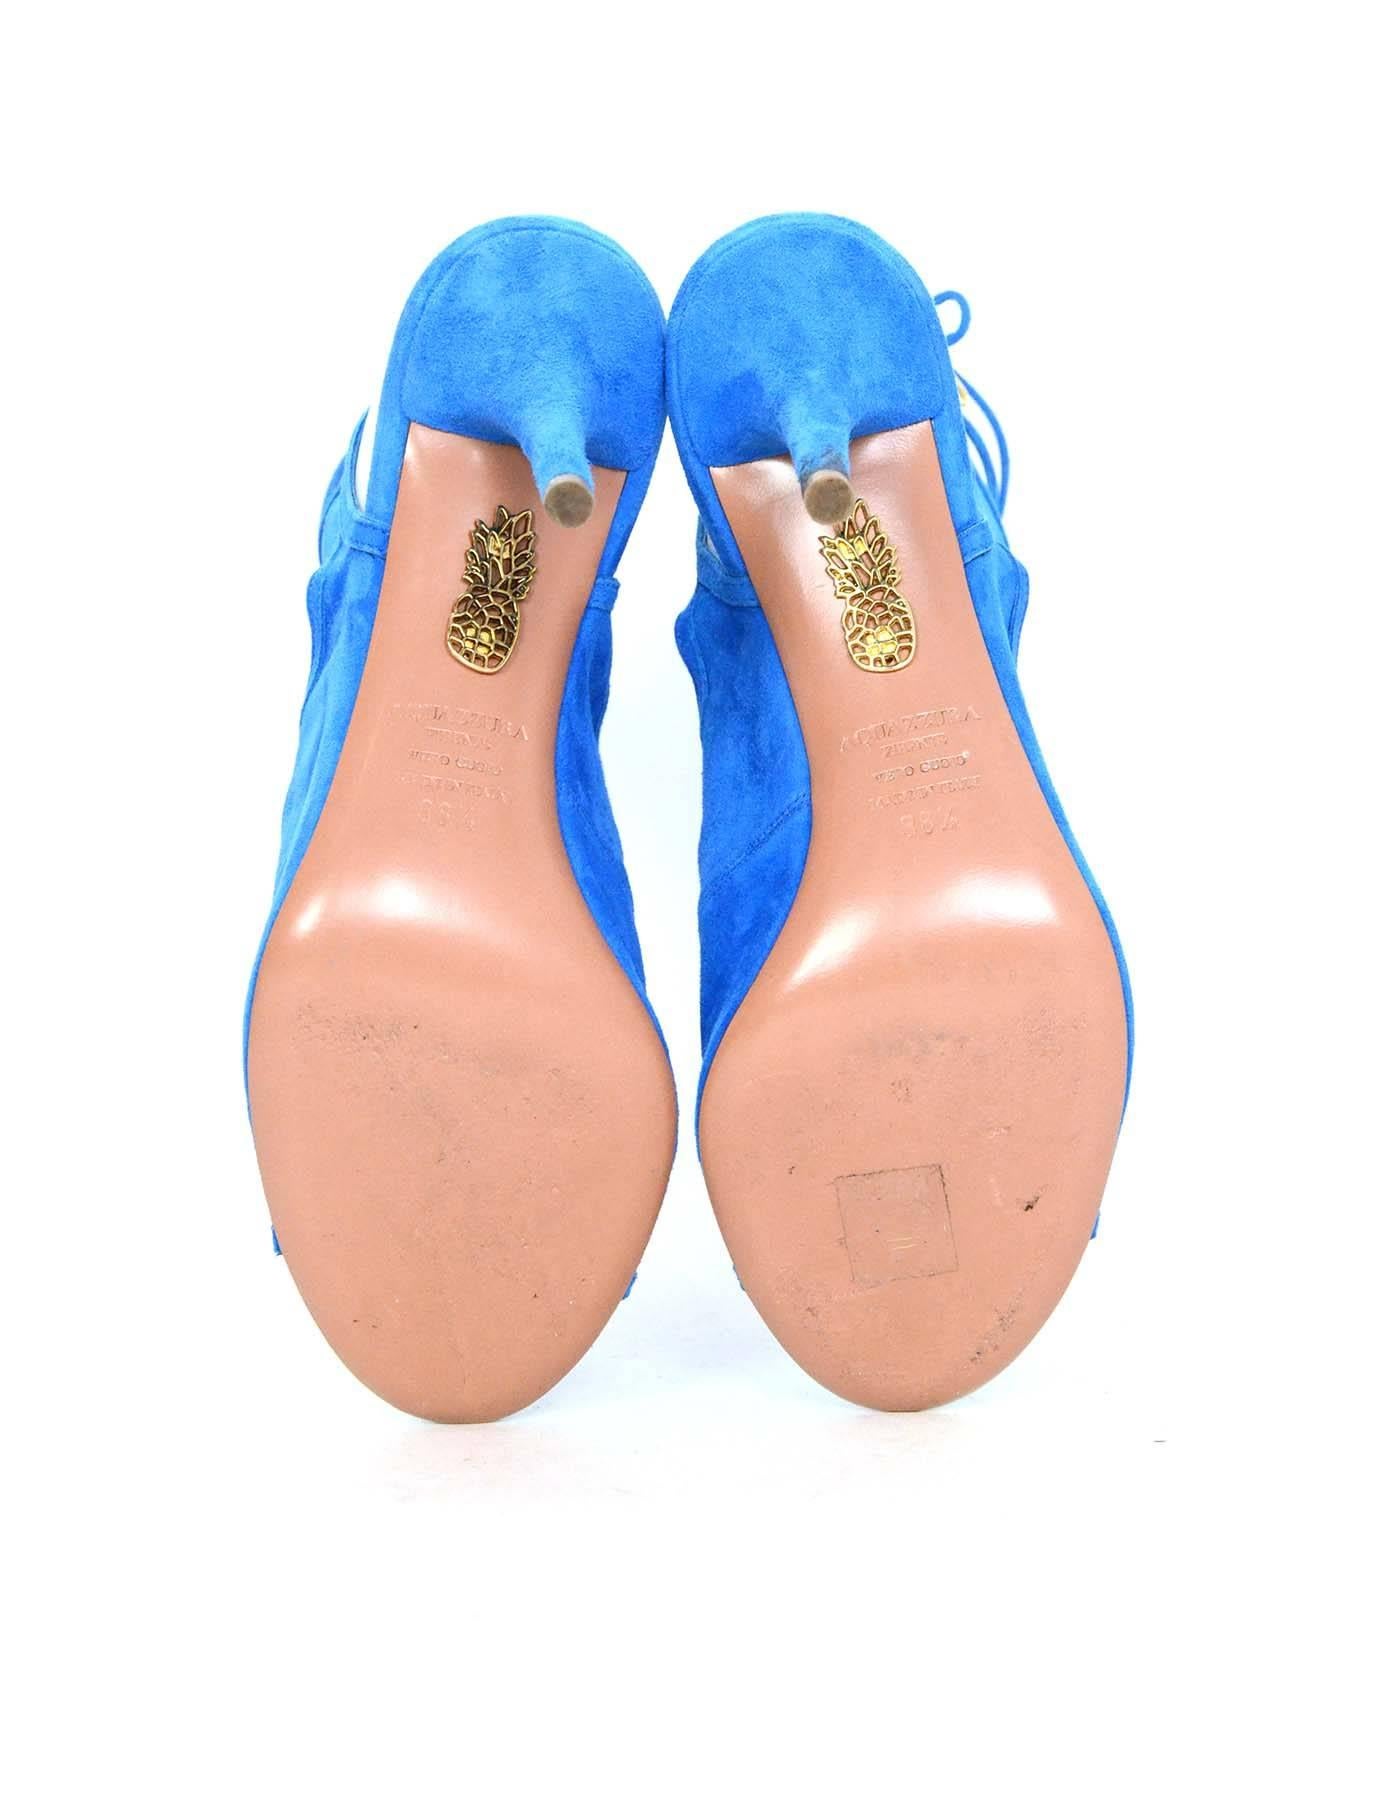 Aquazzura Blue Suede Sexy Thing 105 Cut-Out Sandals sz 38.5 rt. $565 1